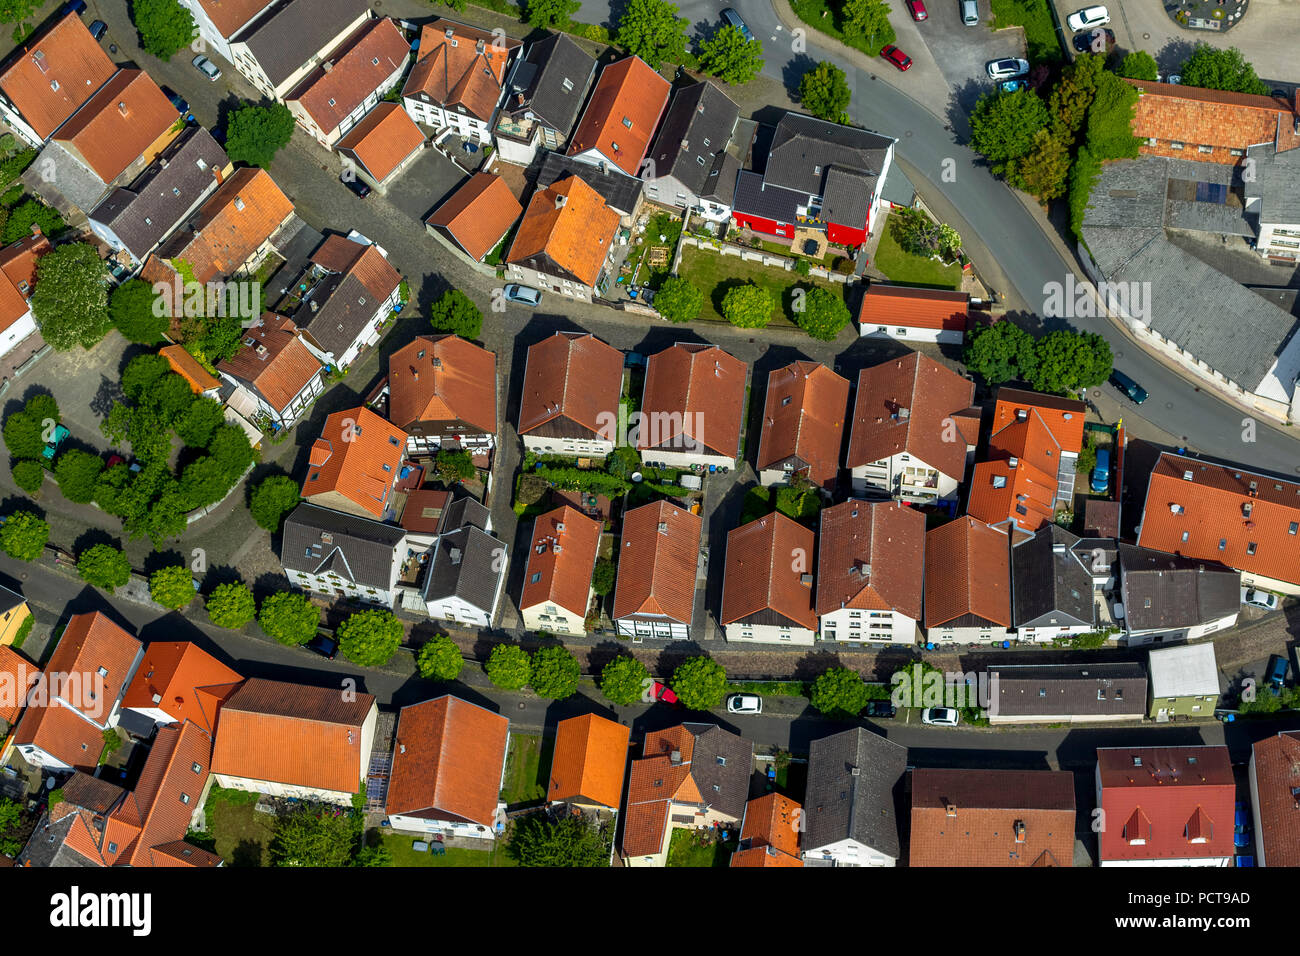 Row of houses along Neuergraben and Kisastraße, contours of historic city fortification, Werl, Werl-Unna Börde, North Rhine-Westphalia, Germany Stock Photo